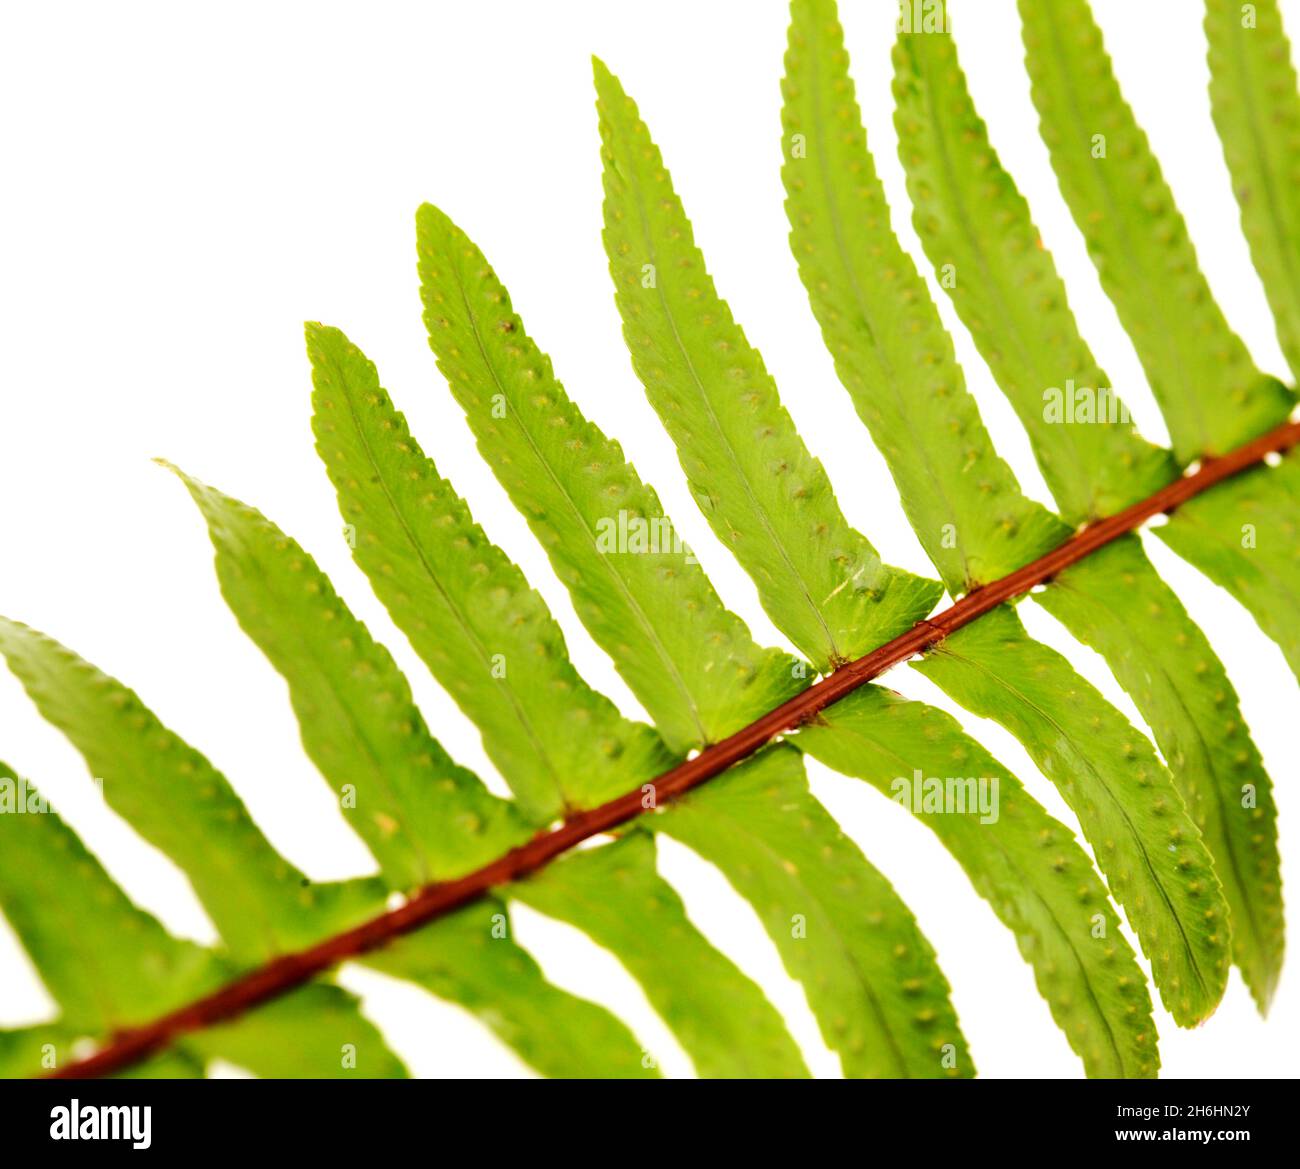 Green fresh frond of fern with spore clusters called sori isolated on white background Stock Photo